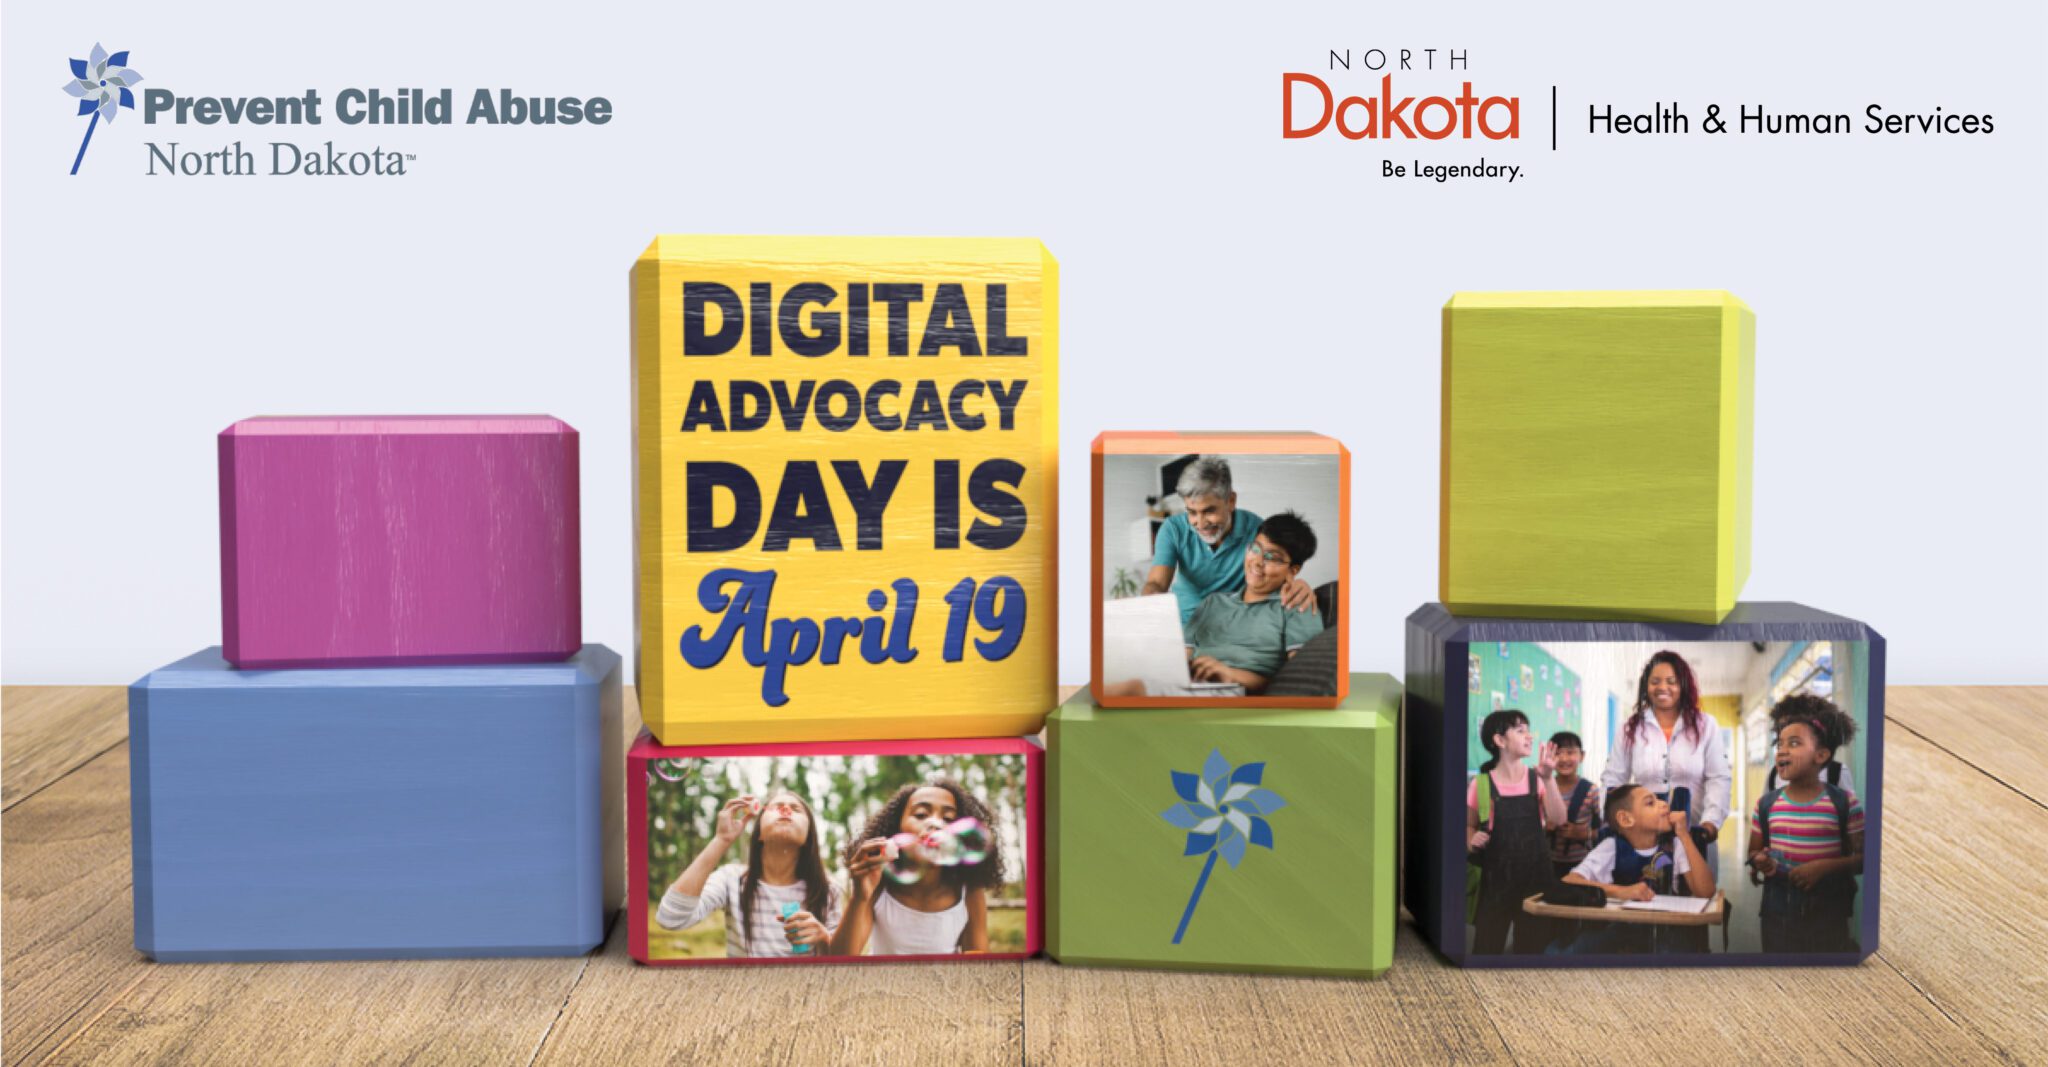 Digital Advocacy Day is April 19th